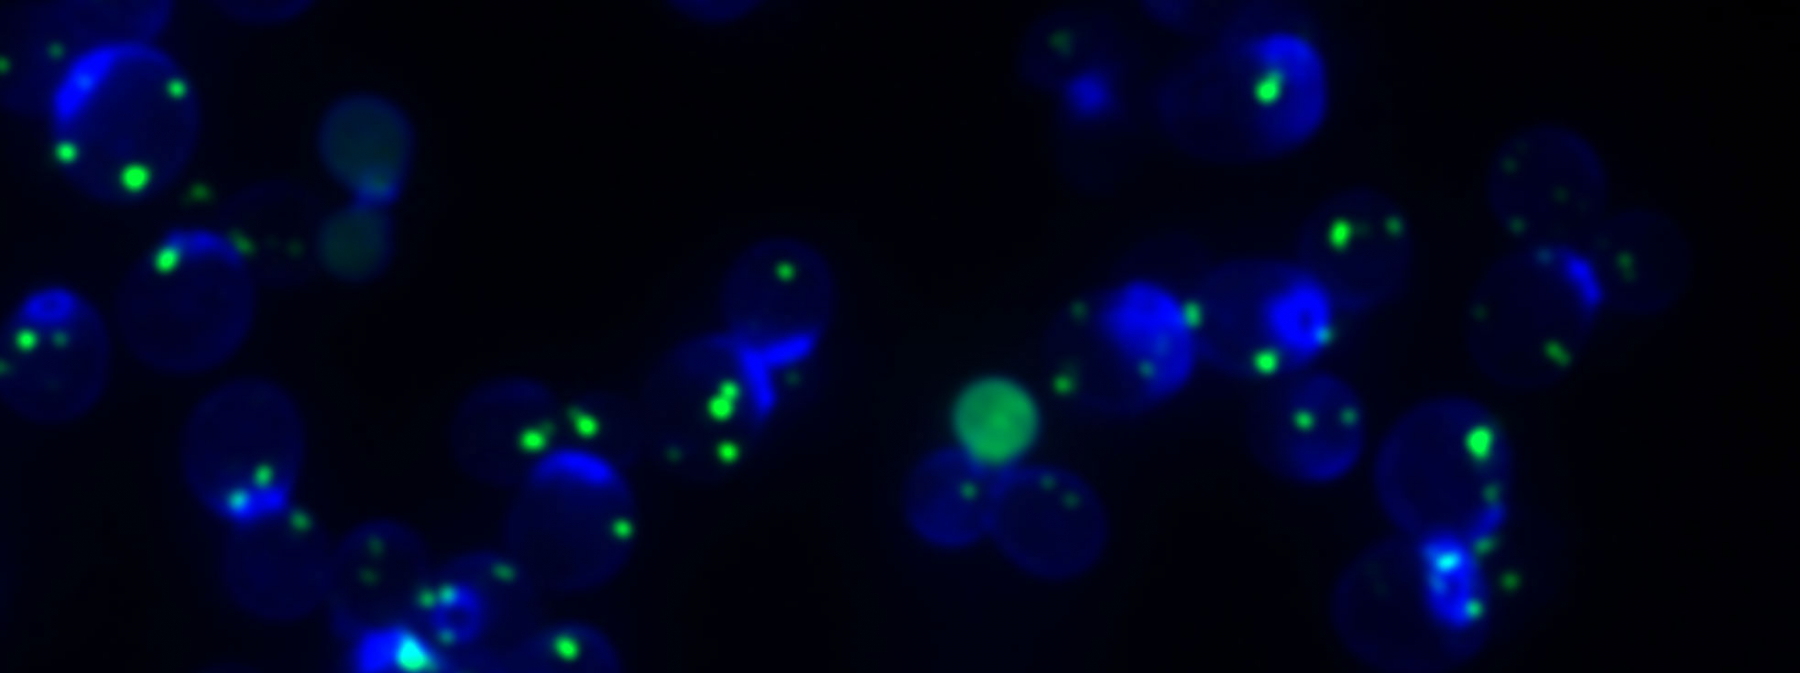 Peroxisomes labeled with GFP-SKL in budding yeast. Credit: Brooke Gardner